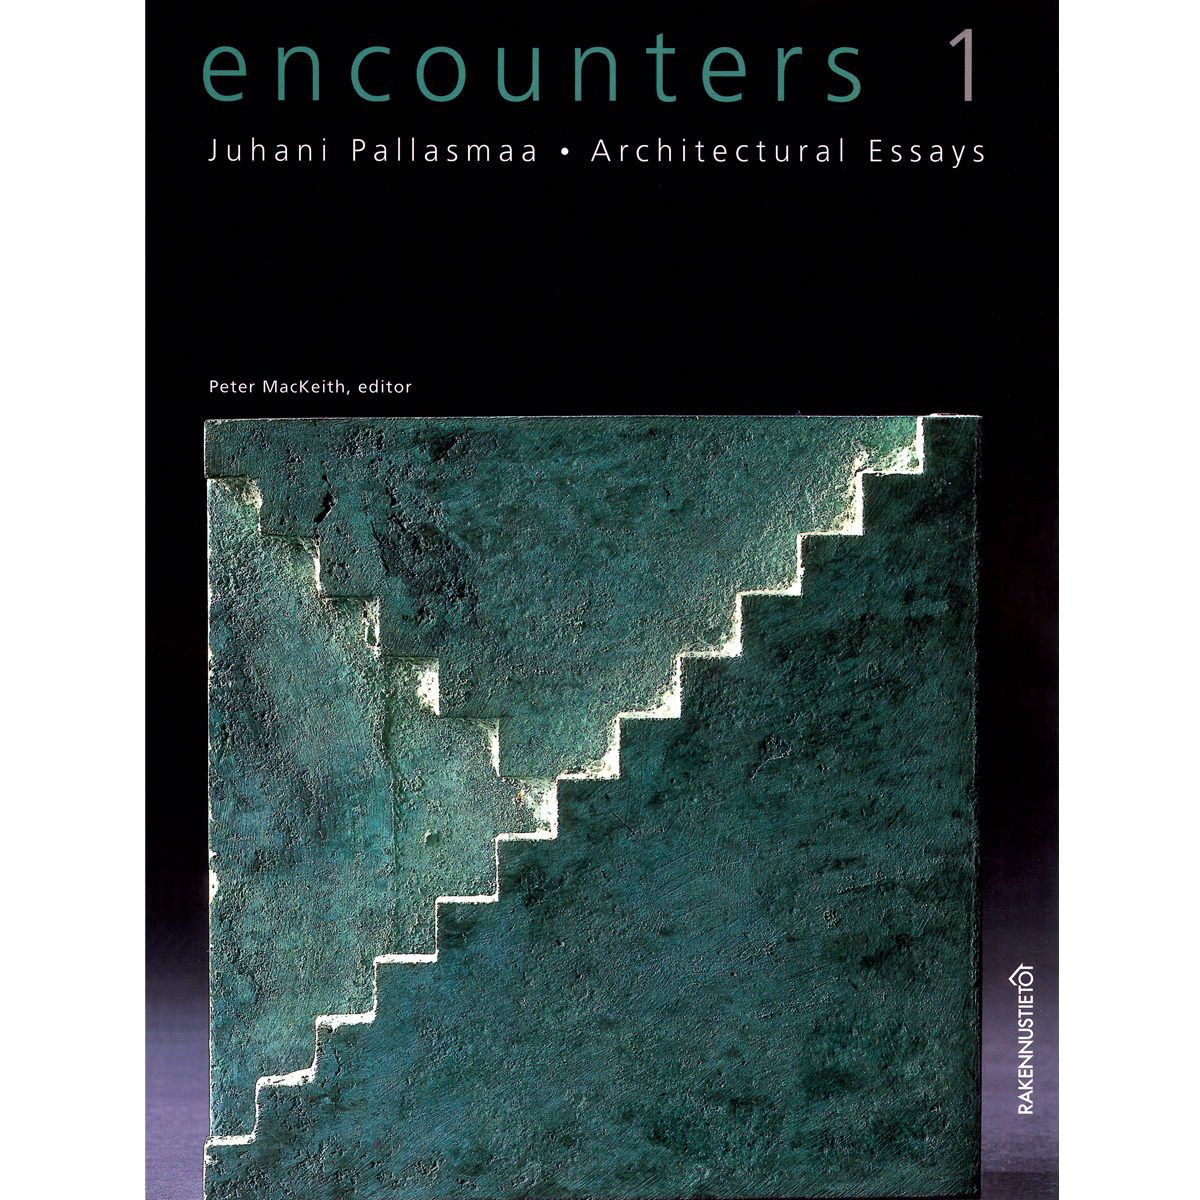 Encounters 1 and 2